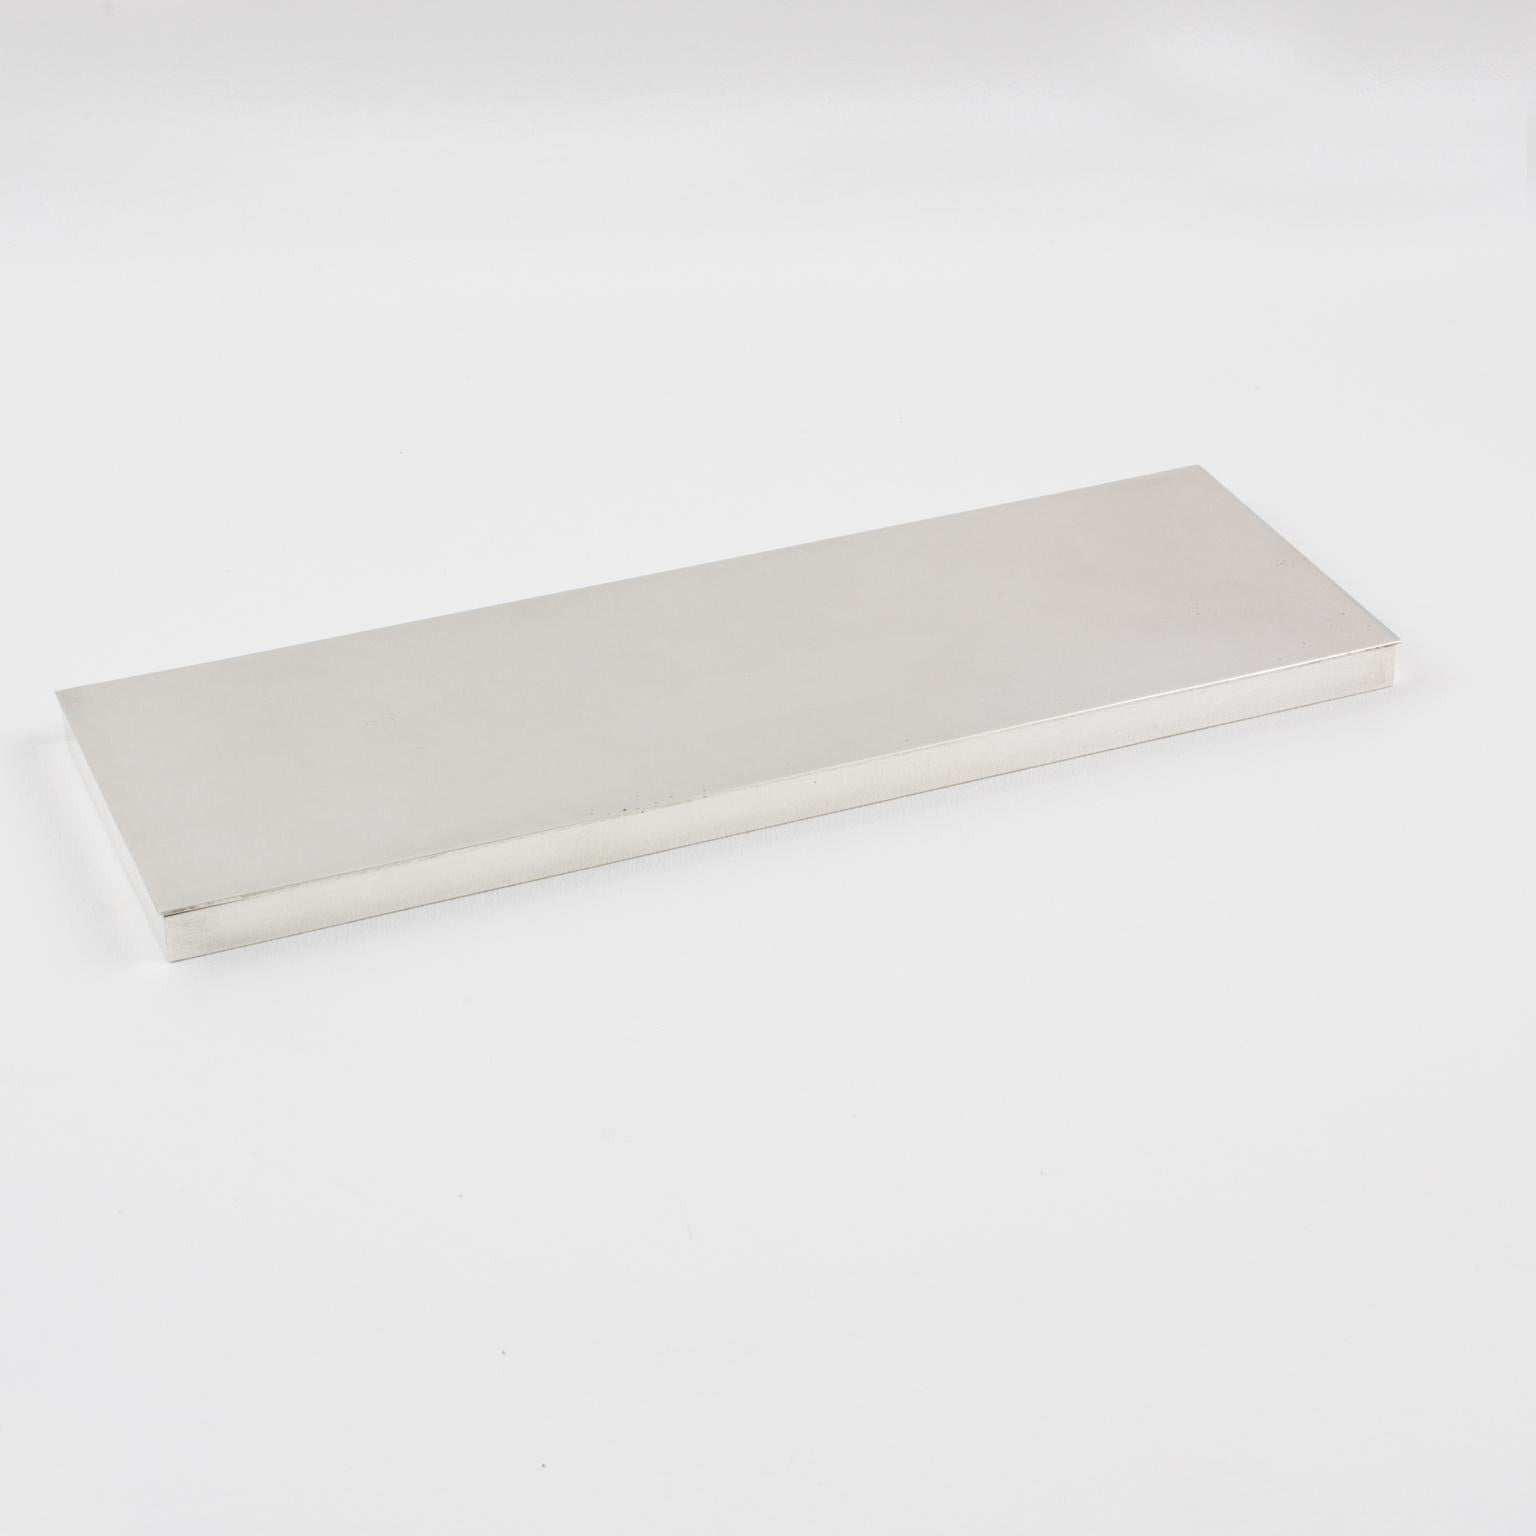 This beautiful French modernist box was crafted in the 1960s and made of silver plate metal. The minimalist and streamlined design features an extra-long and flat shape, making it an excellent choice for a business card holder on a desk or even as a